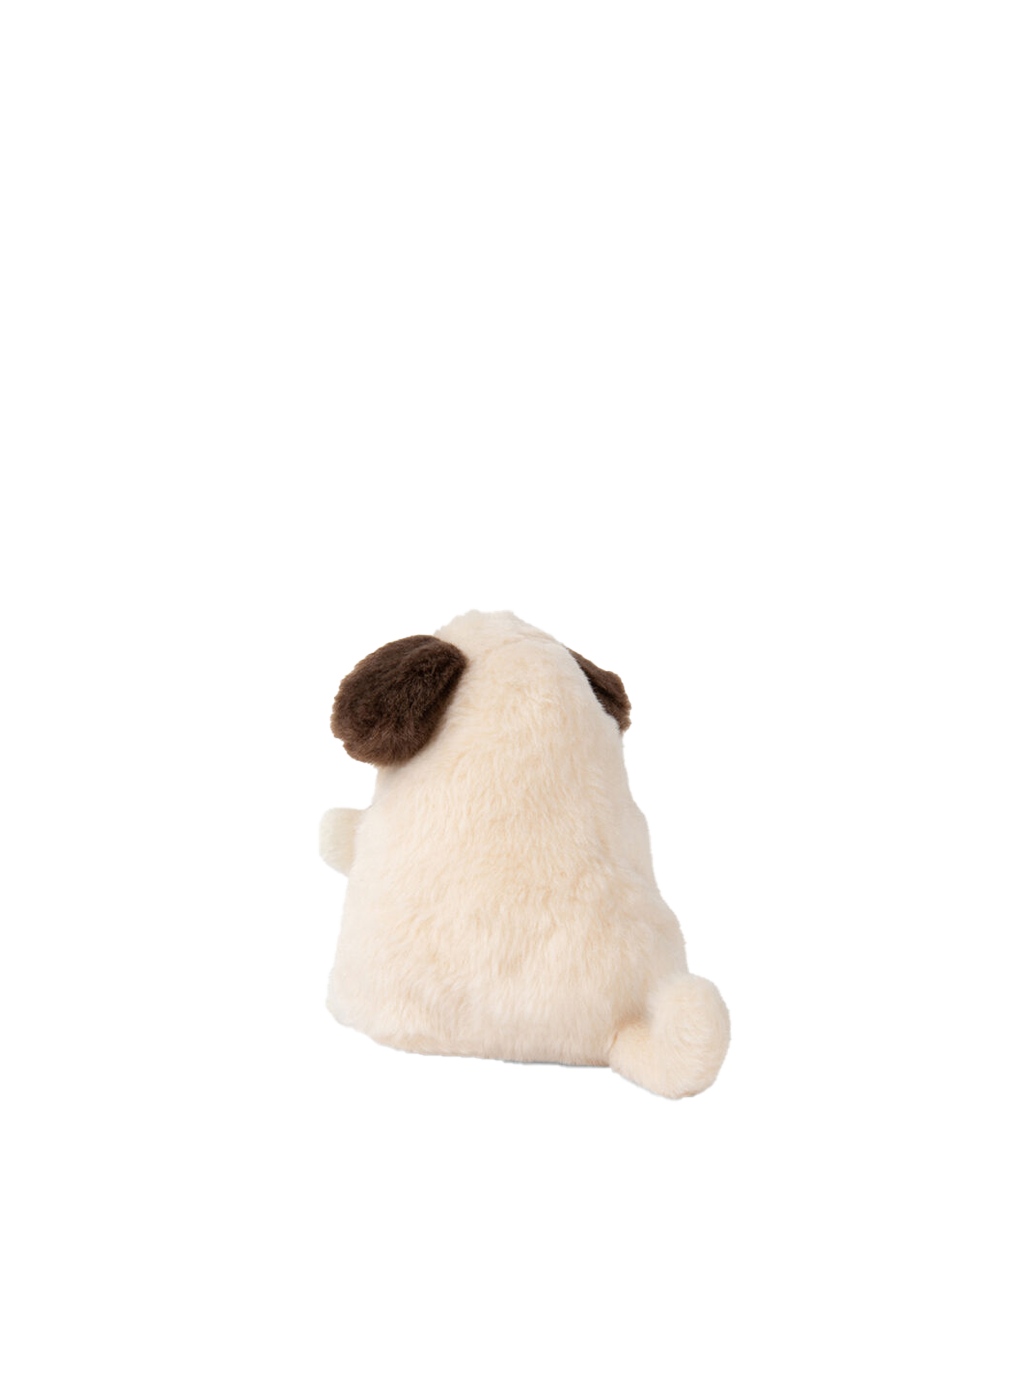 Chubby soft toy